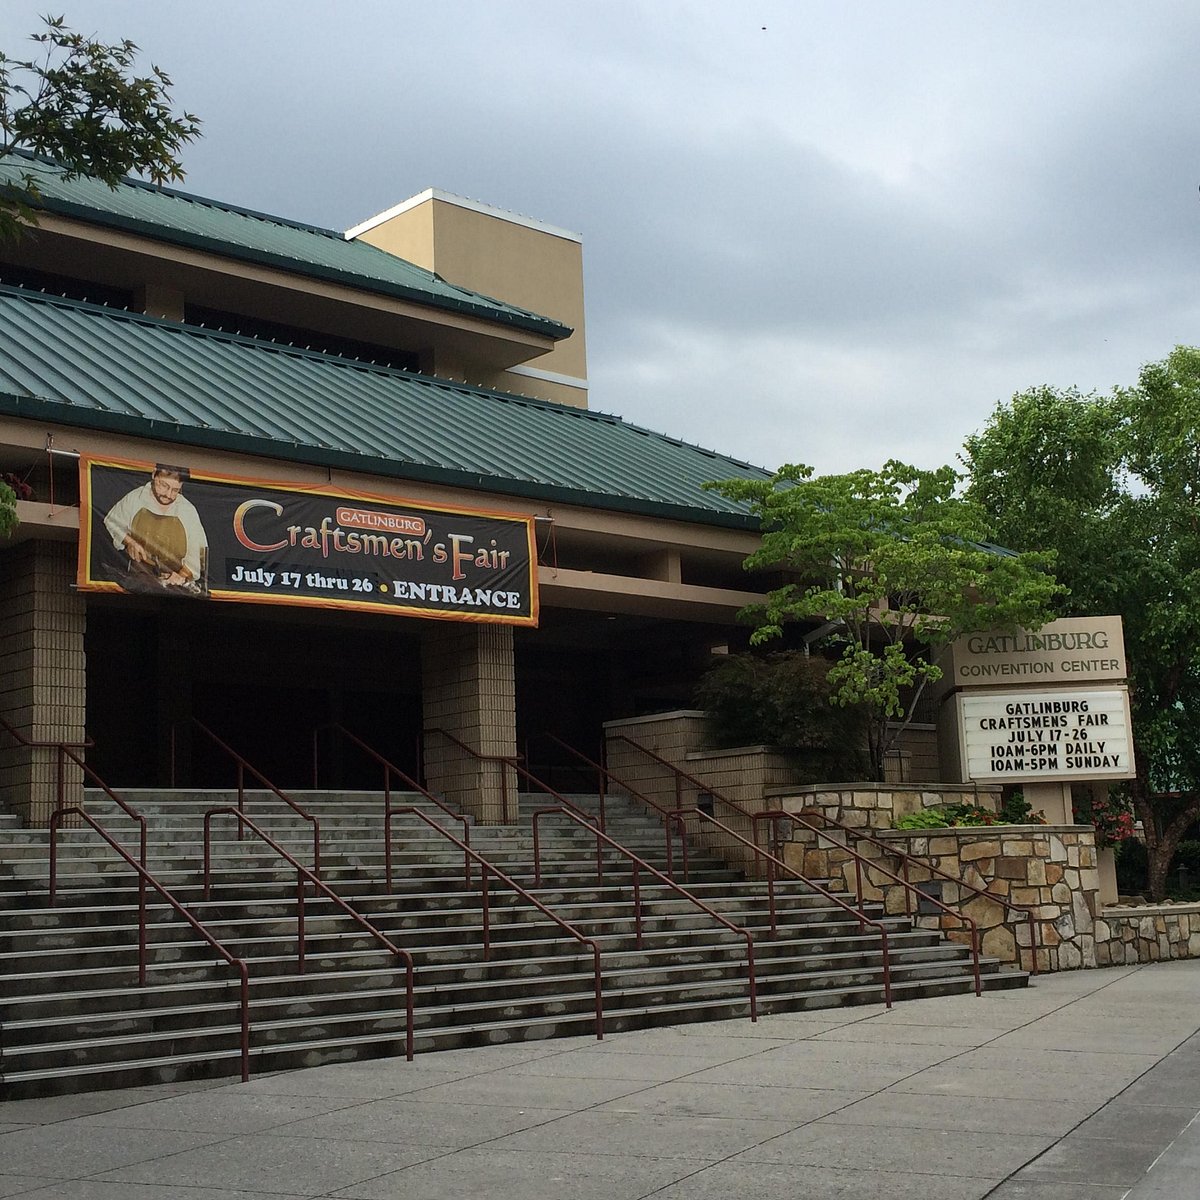 GATLINBURG CONVENTION CENTER All You Need to Know BEFORE You Go